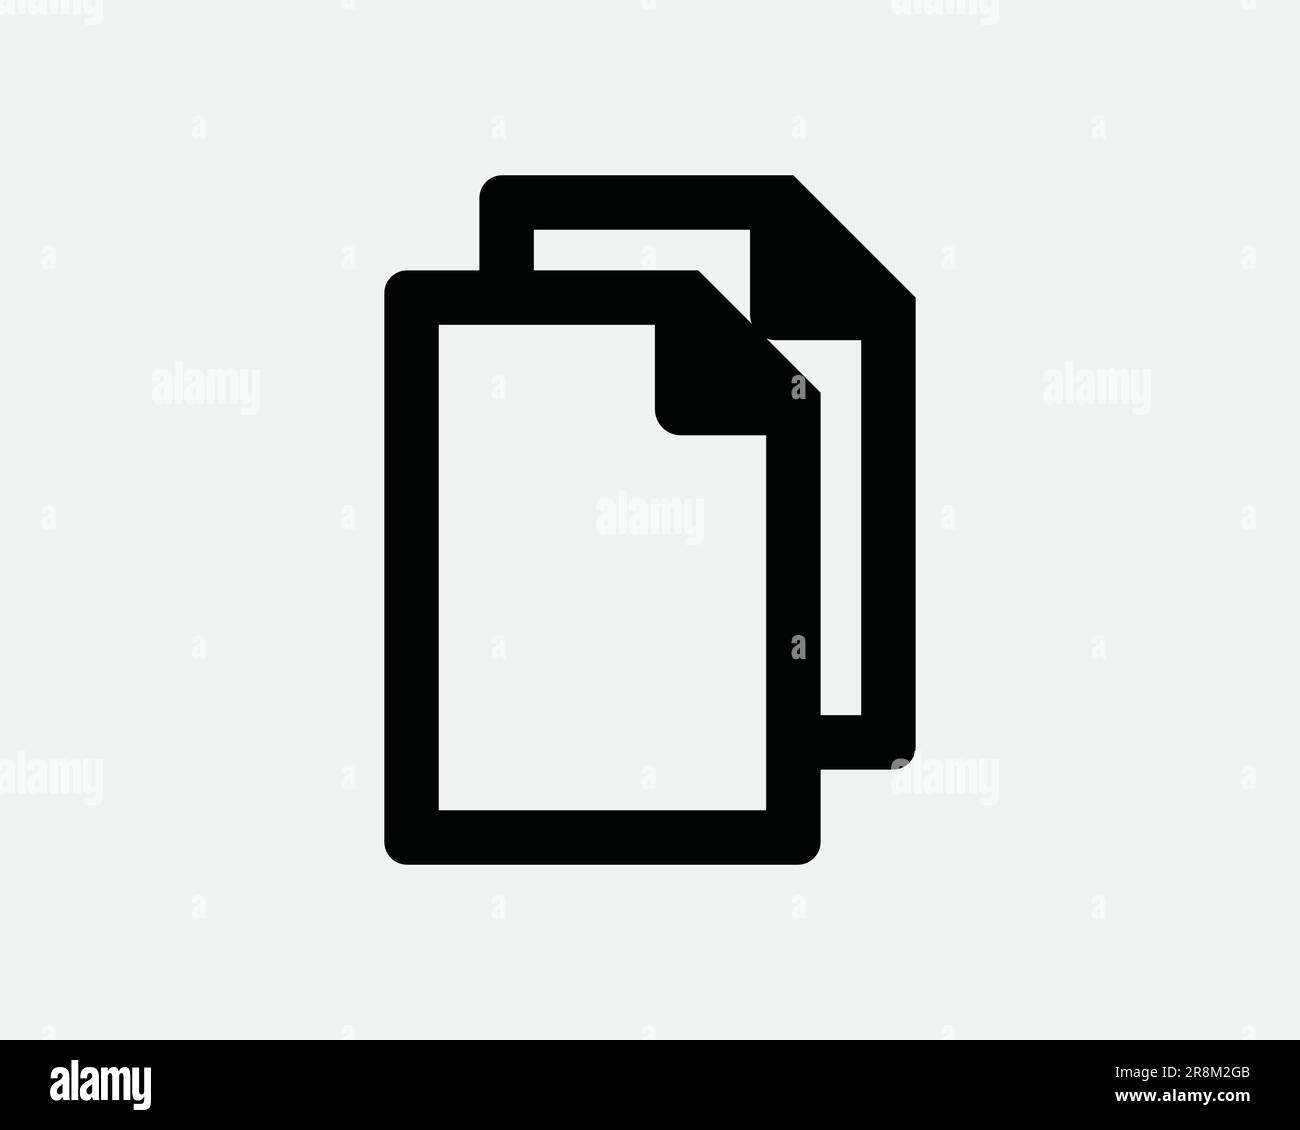 Copy Document Icon. Duplicate File Two Double Page Paper Form Note Computer. Black White Sign Symbol Illustration Artwork Graphic Clipart EPS Vector Stock Vector